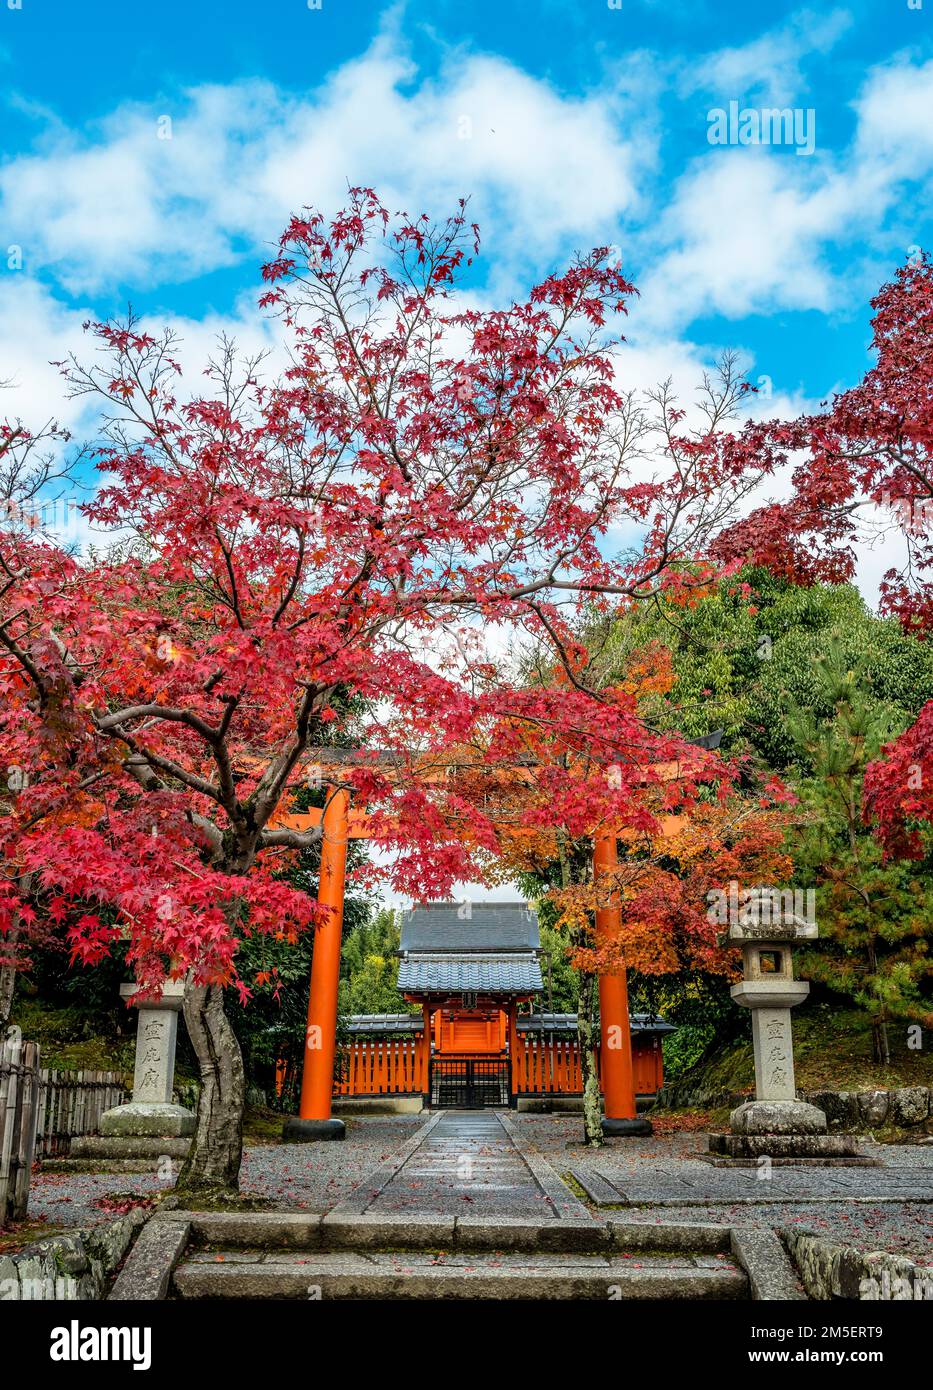 Torii gate at a temple entrance in Kyoto, Japan Stock Photo